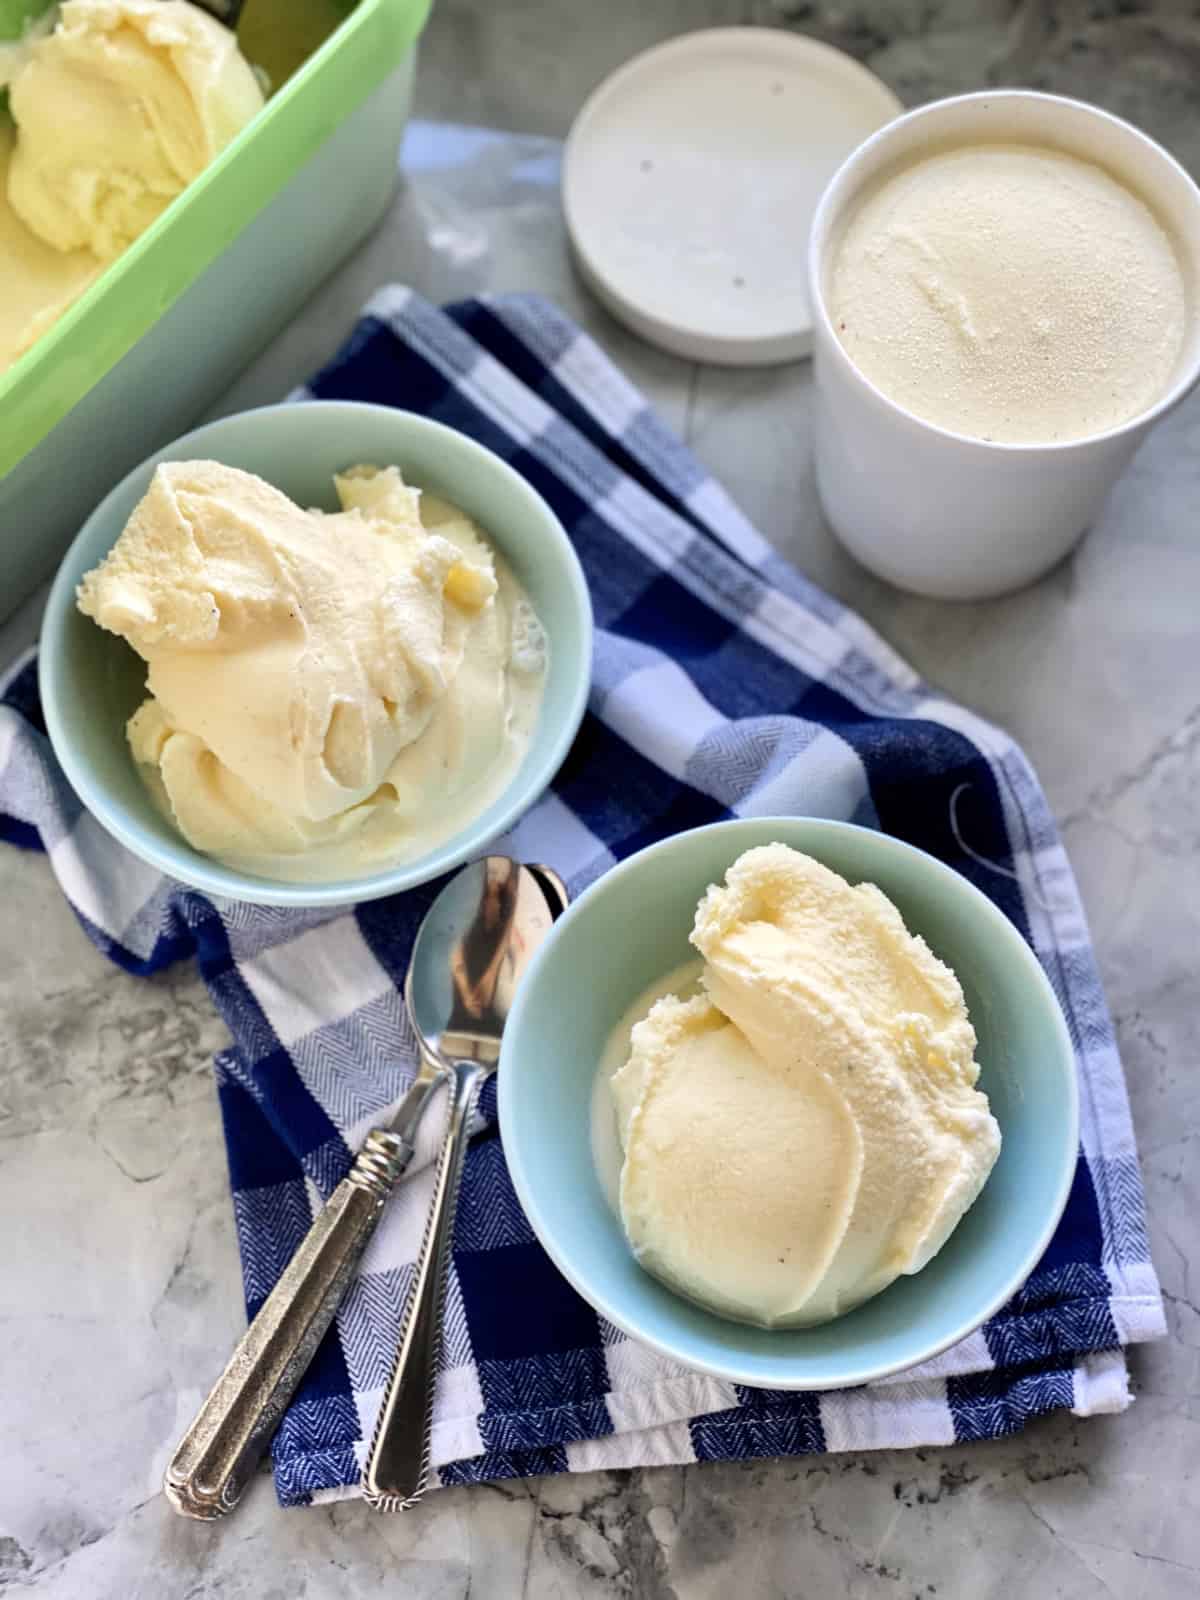 Two bowls of vanilla ice cream on a blue checkered cloth.